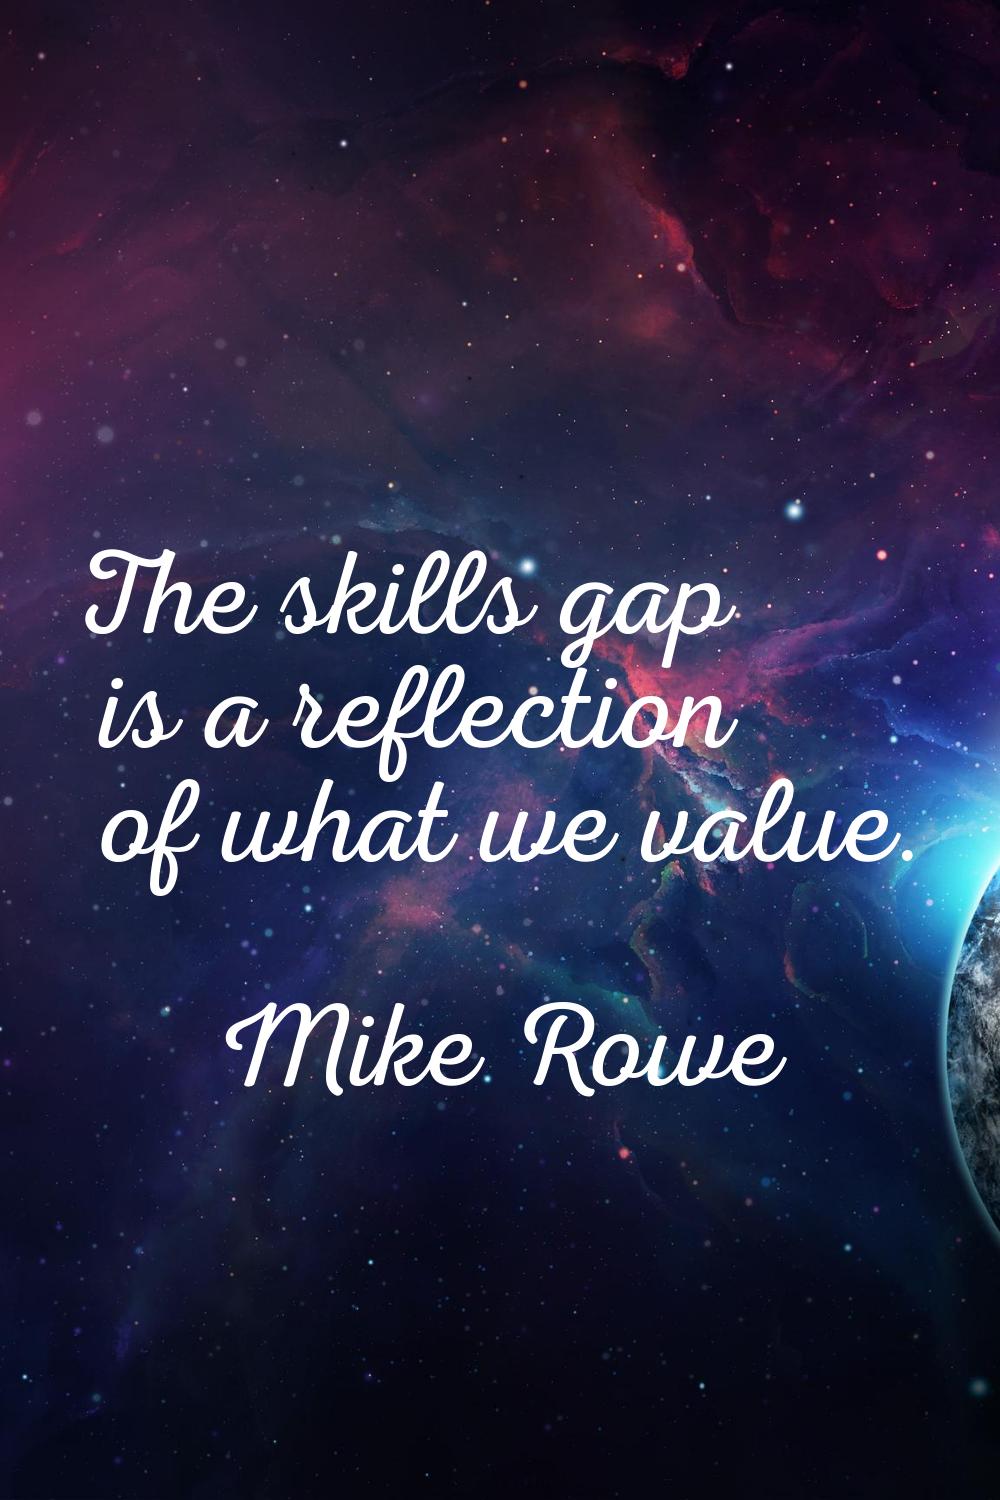 The skills gap is a reflection of what we value.